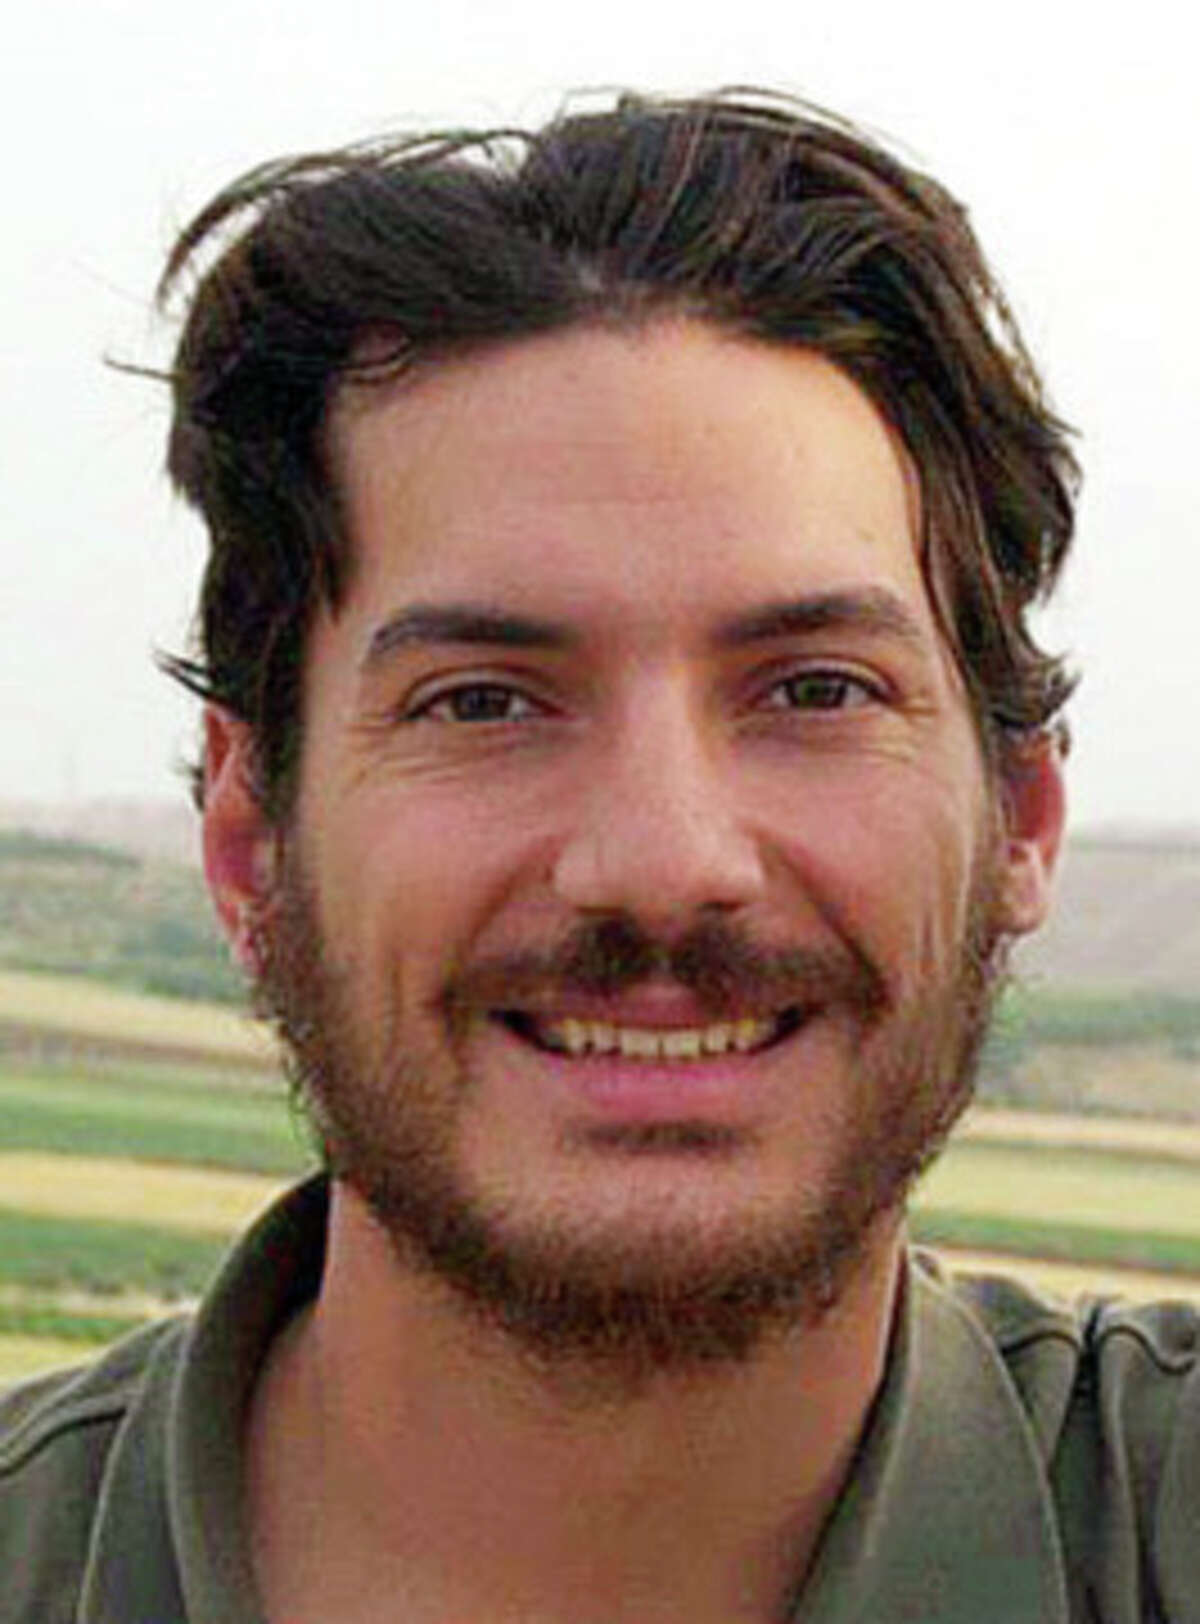 Austin Tice, a freelance journalist for McClatchy and other news outlets, has vanished in Syria. Tice was last heard from in mid-August. (Courtesy of Tice family/MCT)